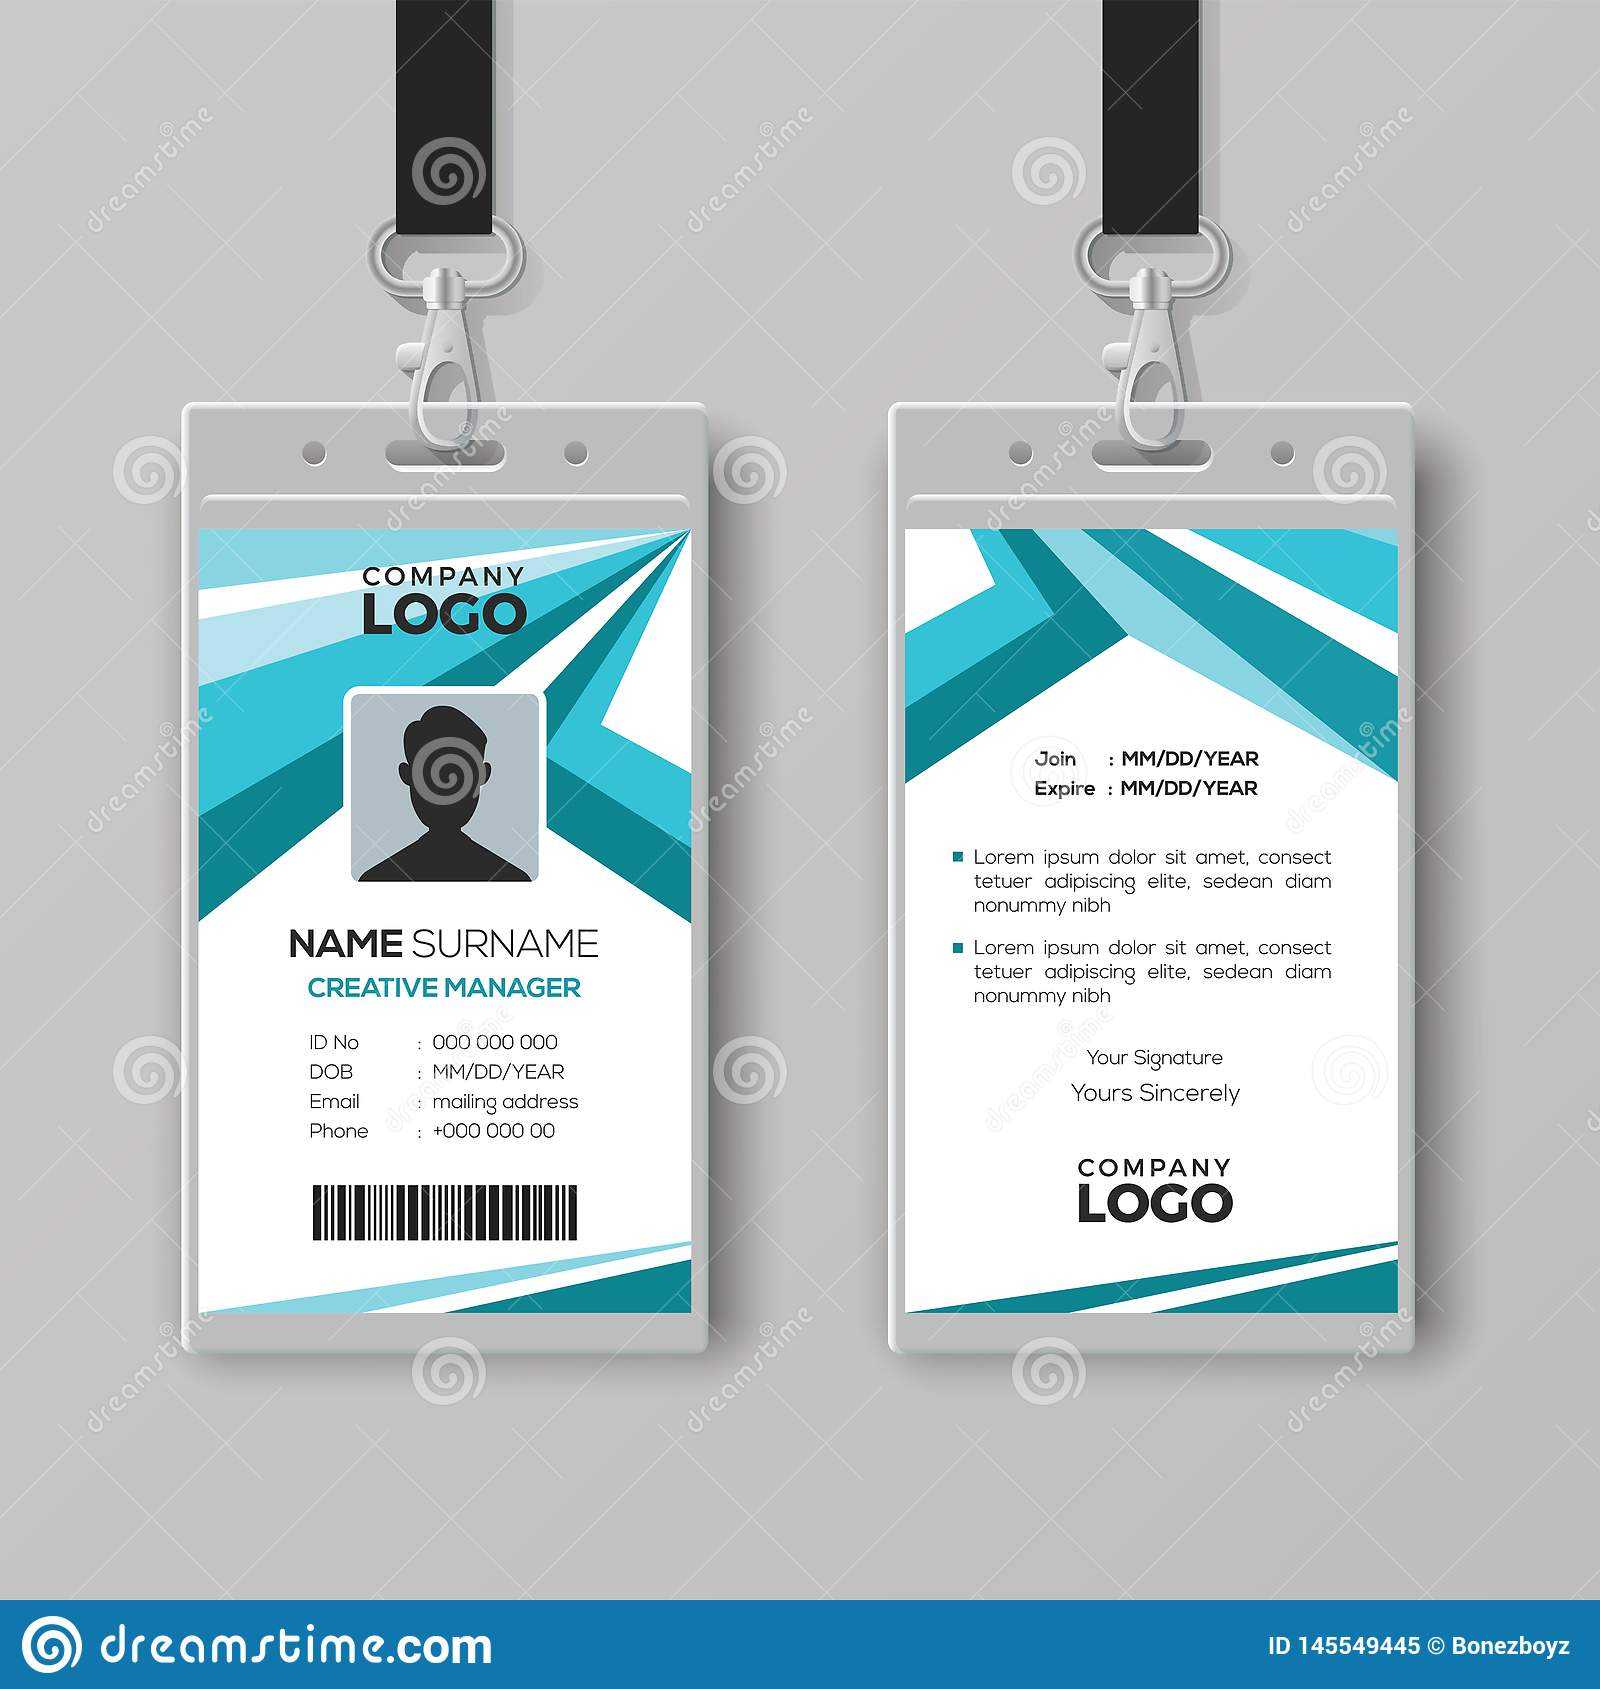 Abstract Corporate Id Card Design Template Stock Vector Inside Conference Id Card Template